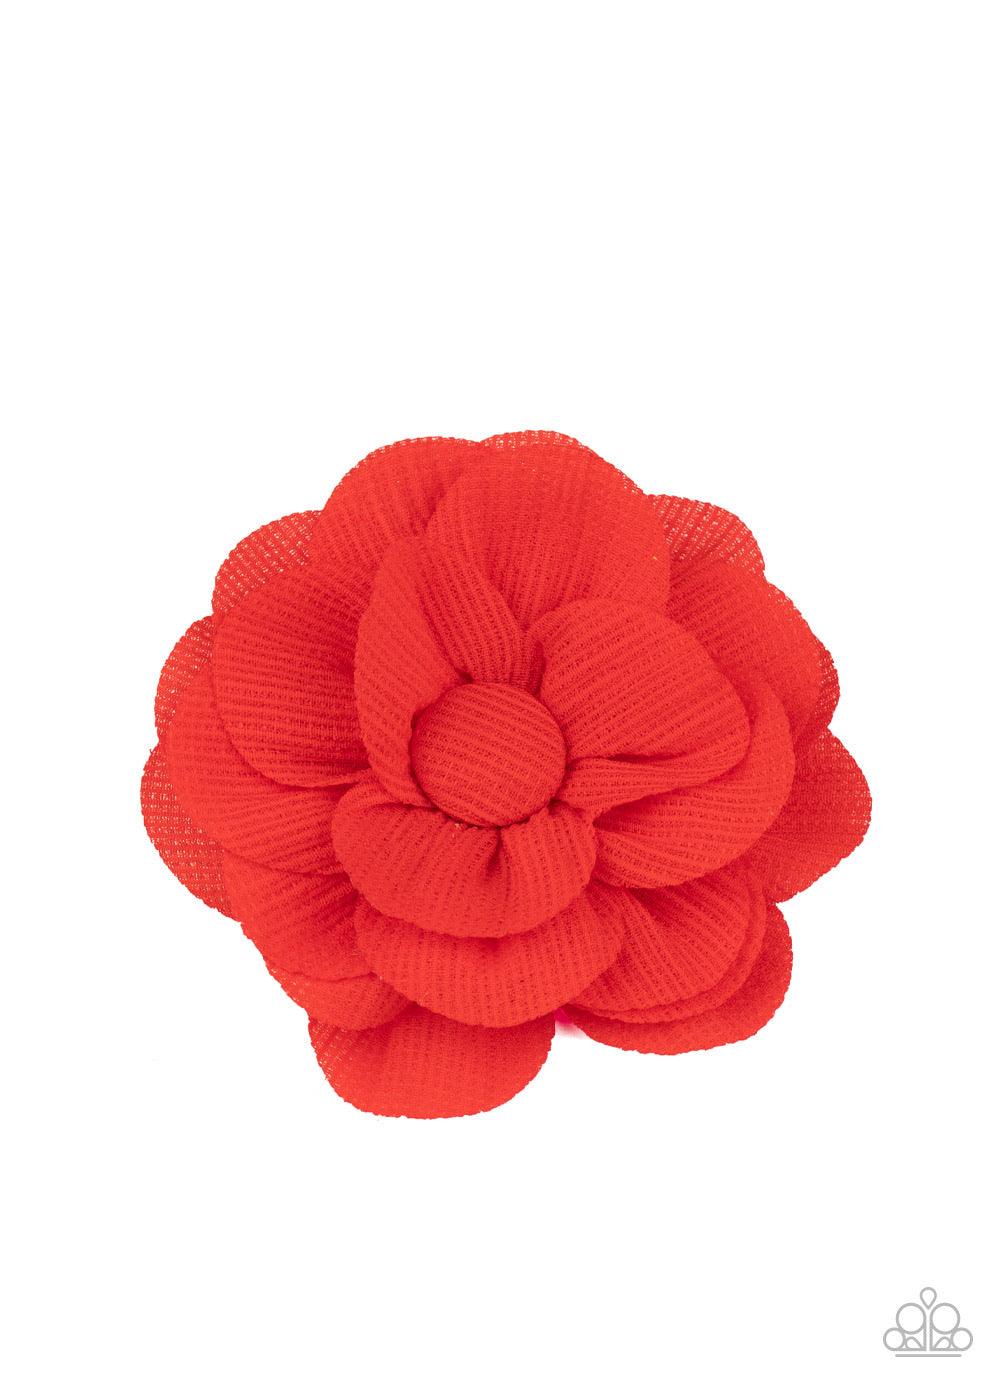 Paparazzi Accessories Summer Soirée - Red Red textured chiffon petals delicately gather around a matching button-top center, layering into a whimsical blossom. Features a standard hair clip on the back. Sold as one individual hair clip. Hair Accessories